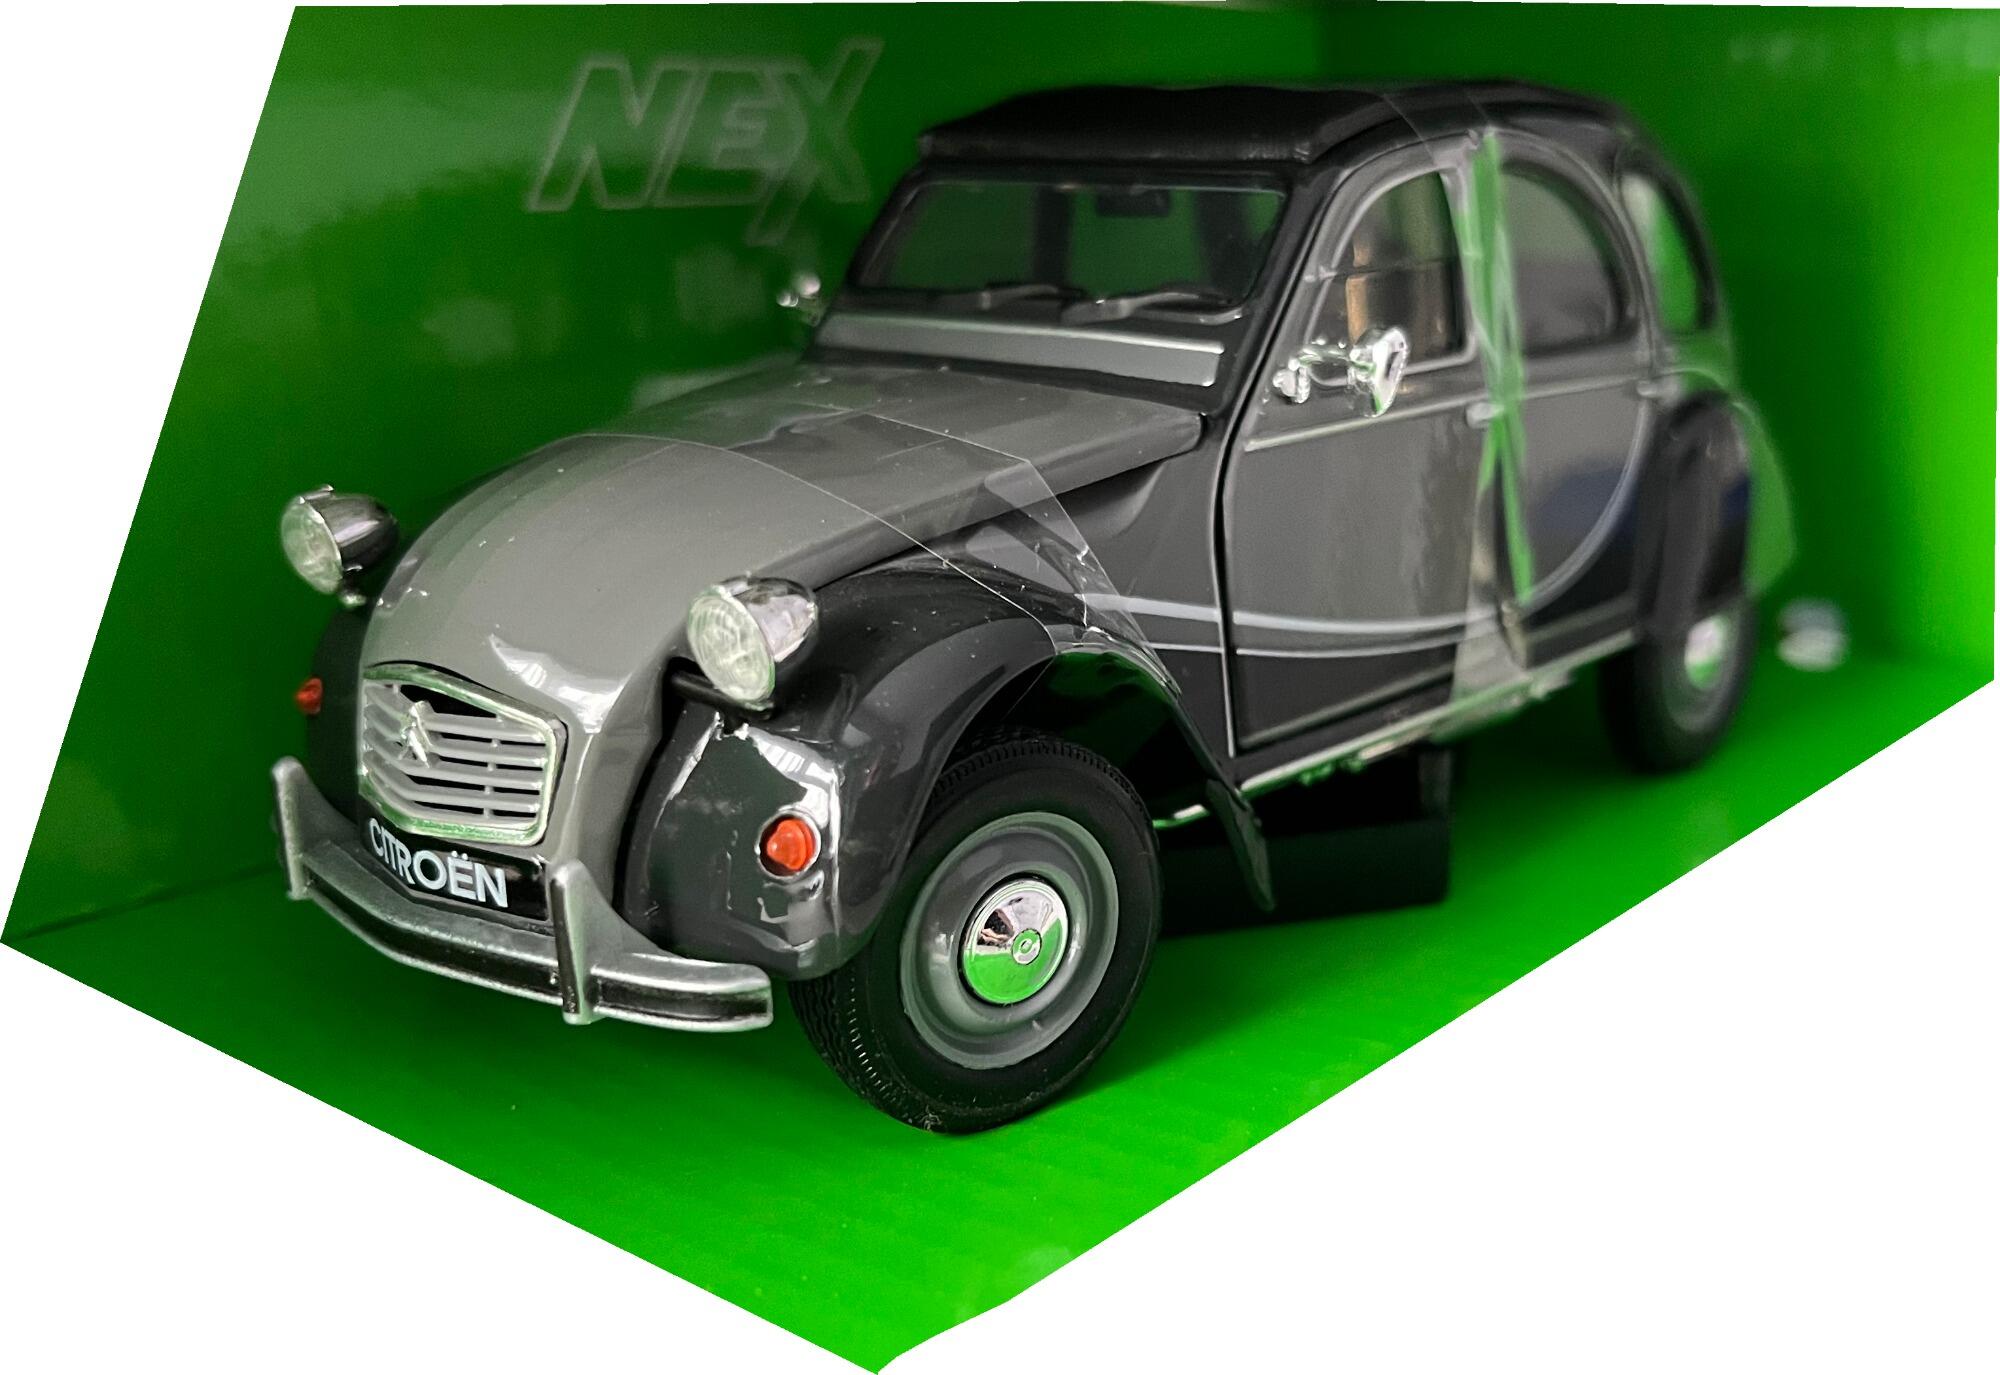 Citroen 2CV 6 Charleston 1982 in grey and black, 1:24 scale diecast car  model from Welly, 24009